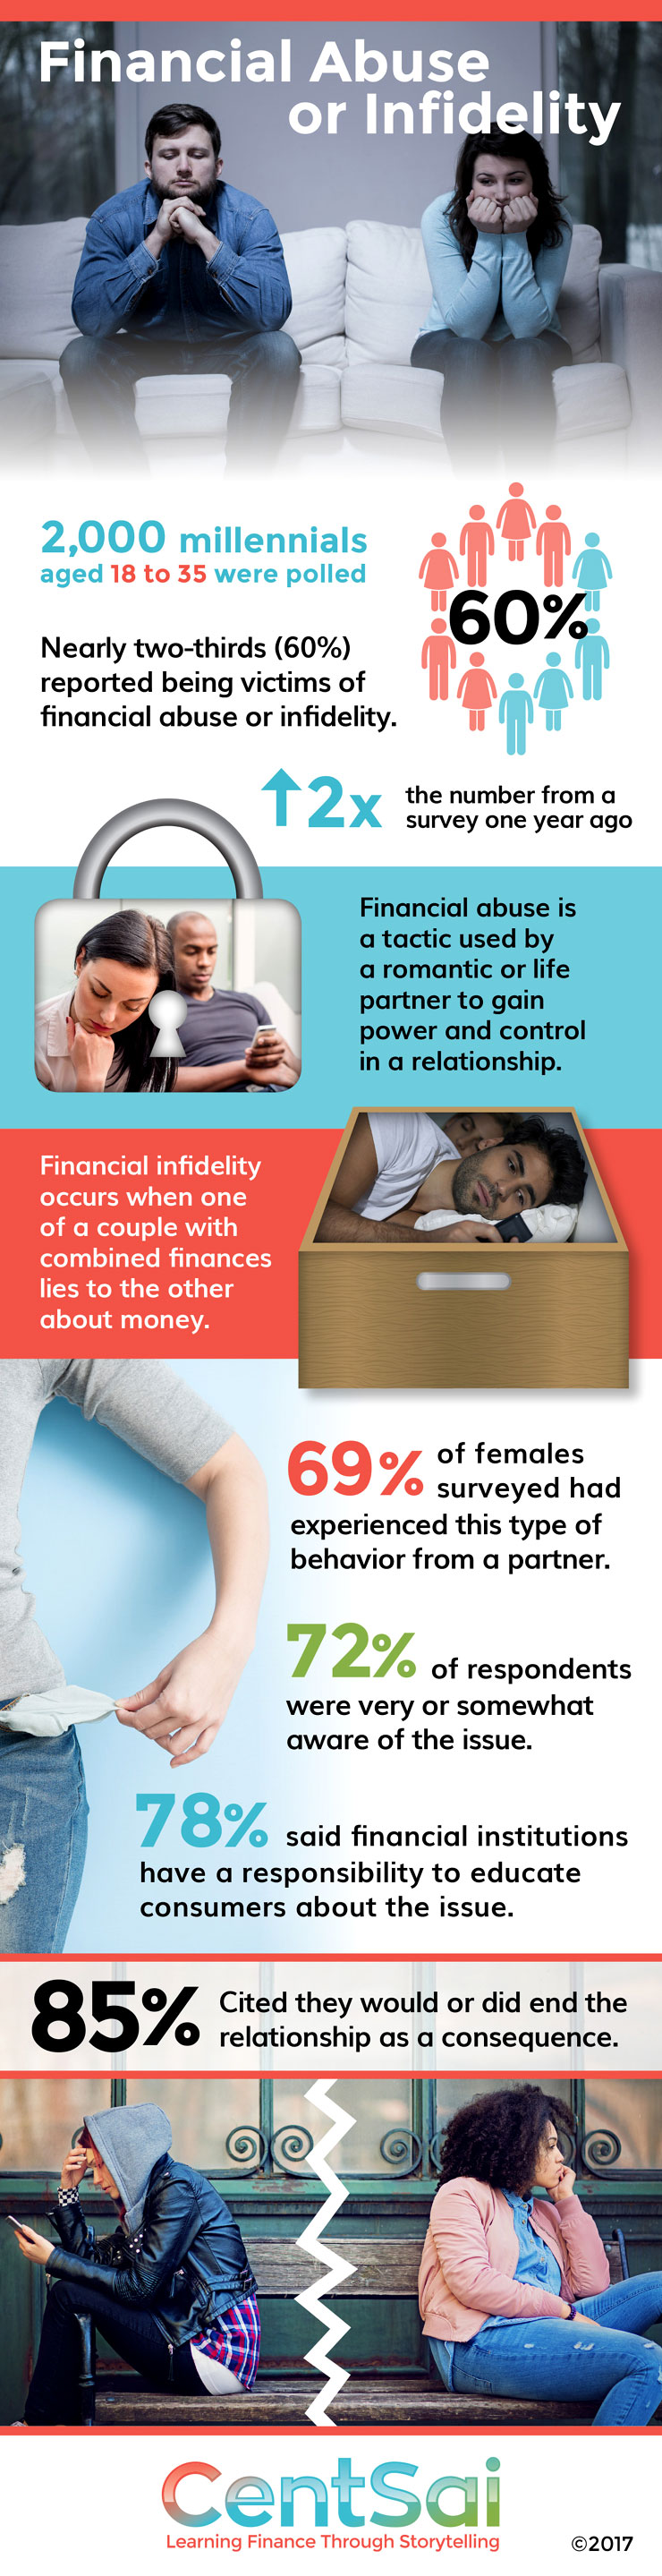 Financial Abuse in Millennial Relationships Infographic